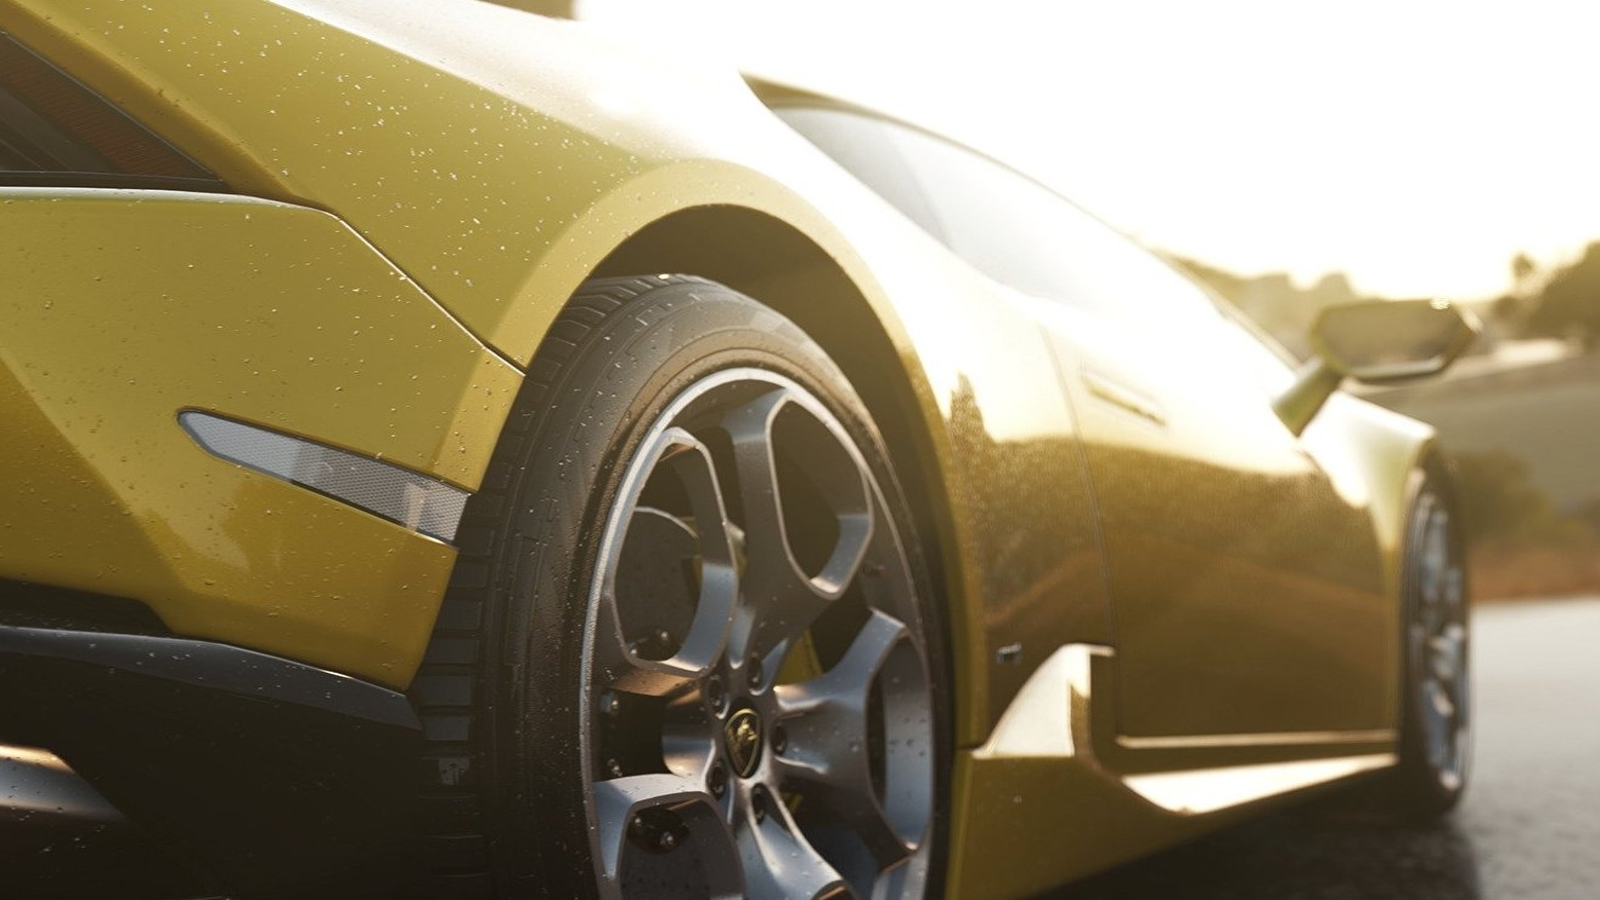 Forza Horizon 2 Presents Fast & Furious Review: Two Miles an Hour